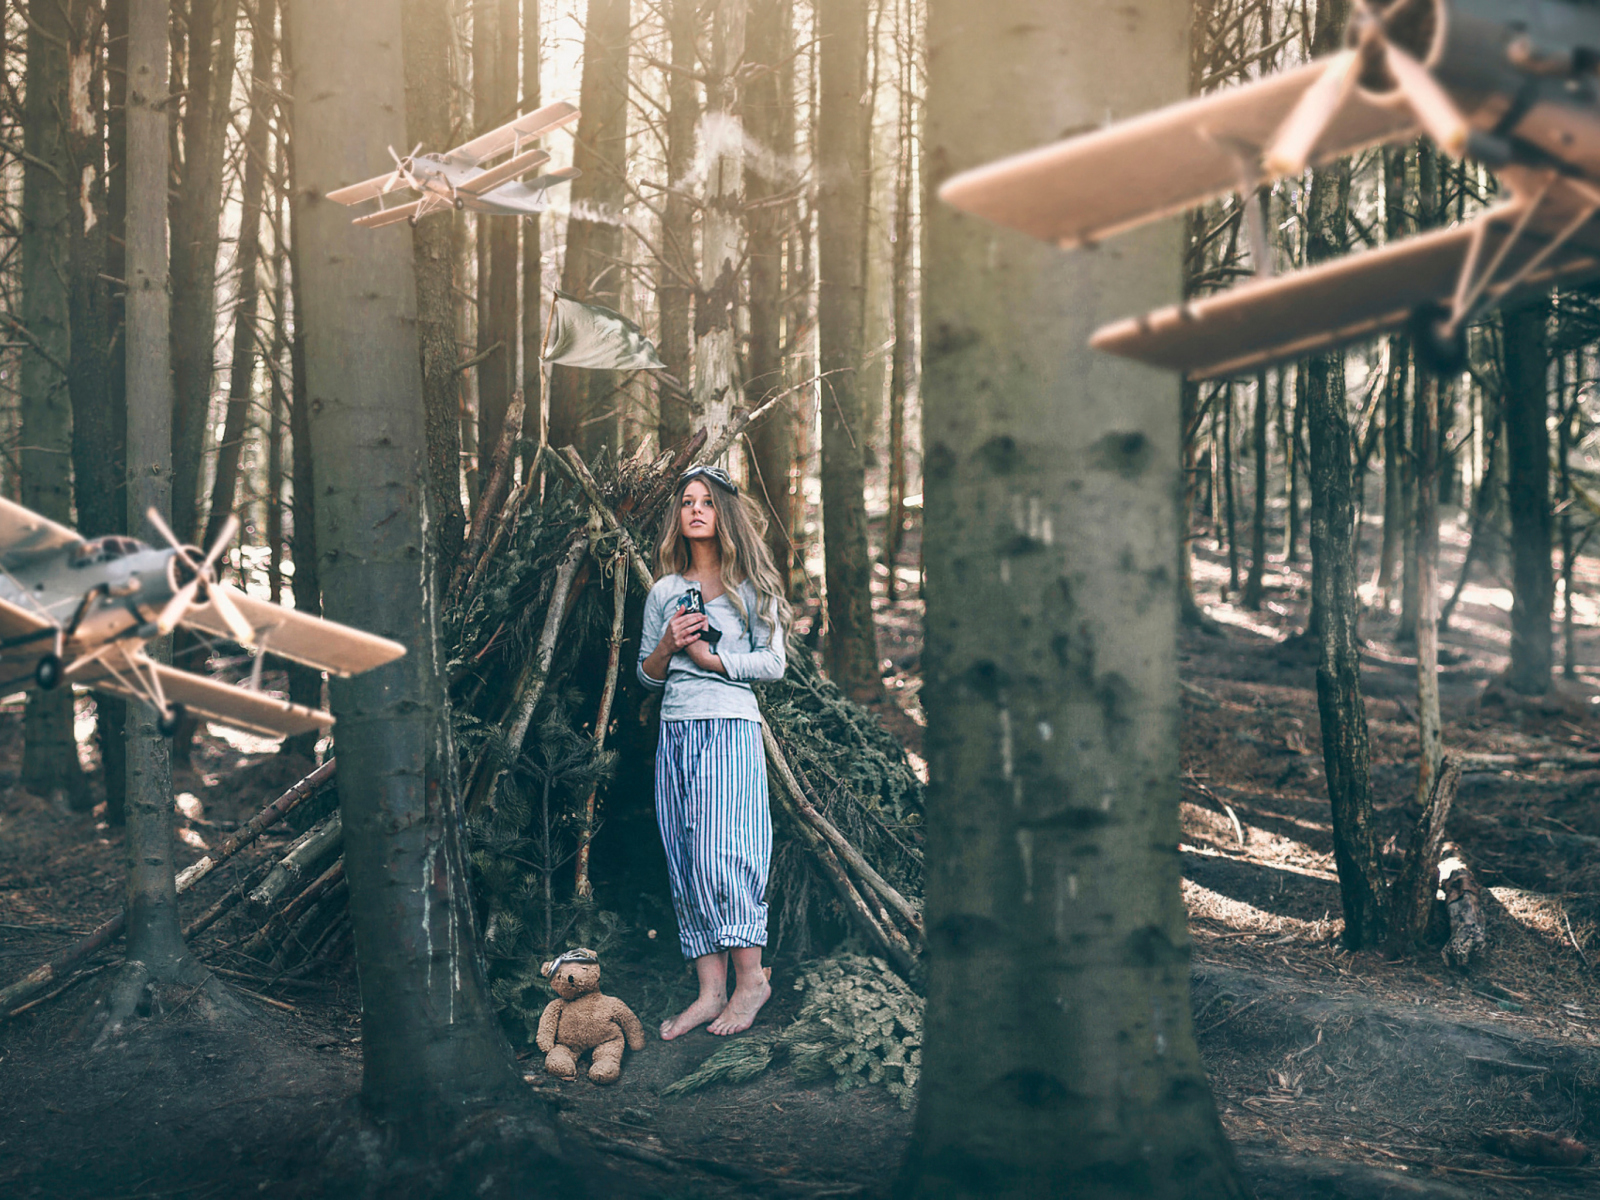 Girl And Teddy Bear In Forest By Rosie Hardy wallpaper 1600x1200